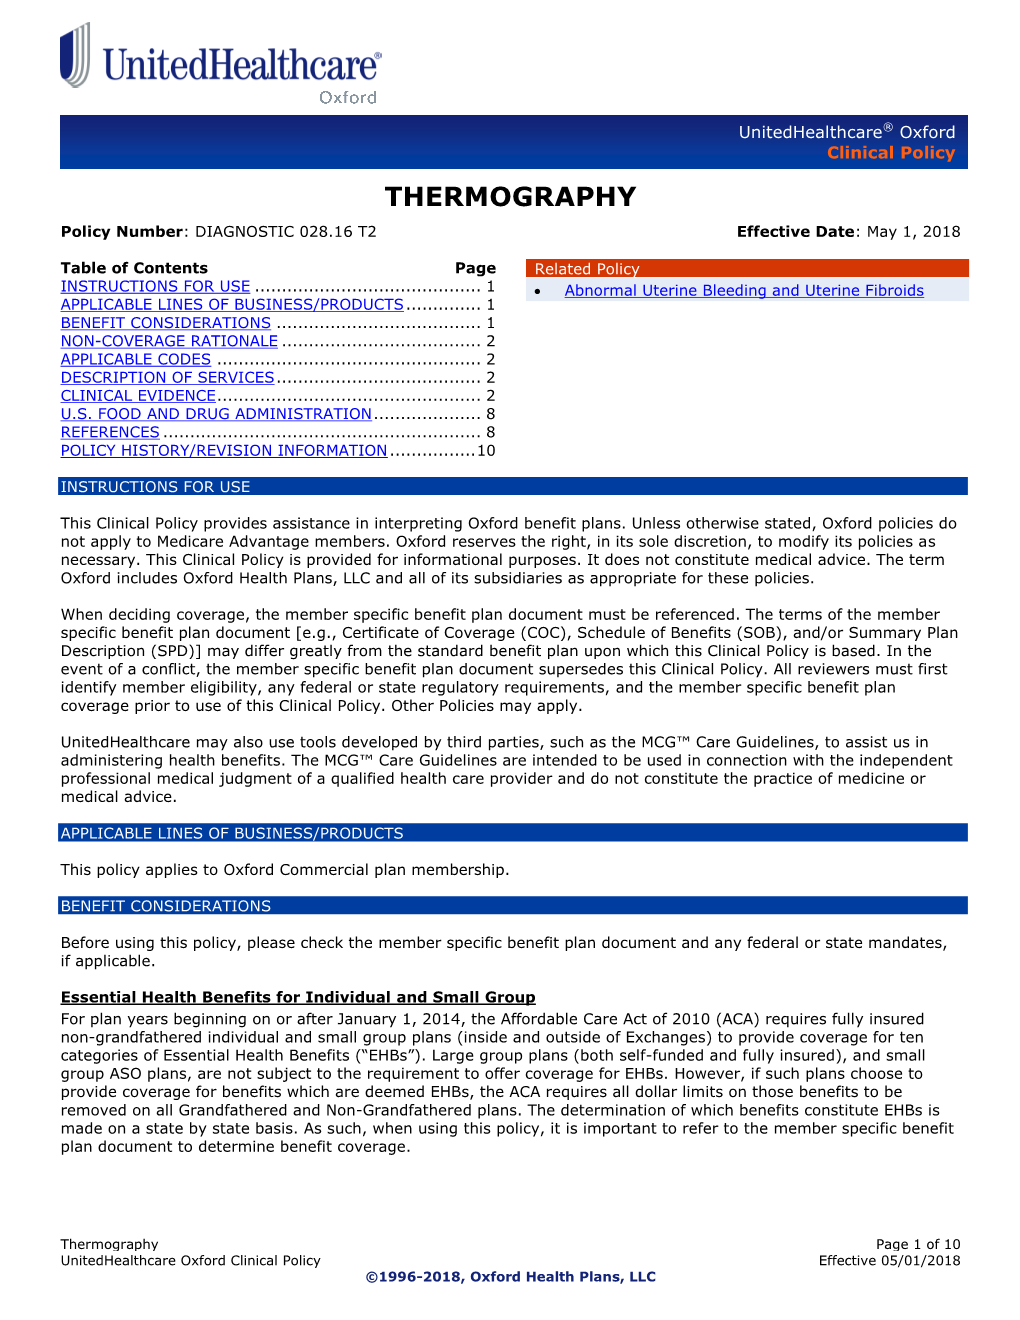 THERMOGRAPHY Policy Number: DIAGNOSTIC 028.16 T2 Effective Date: May 1, 2018